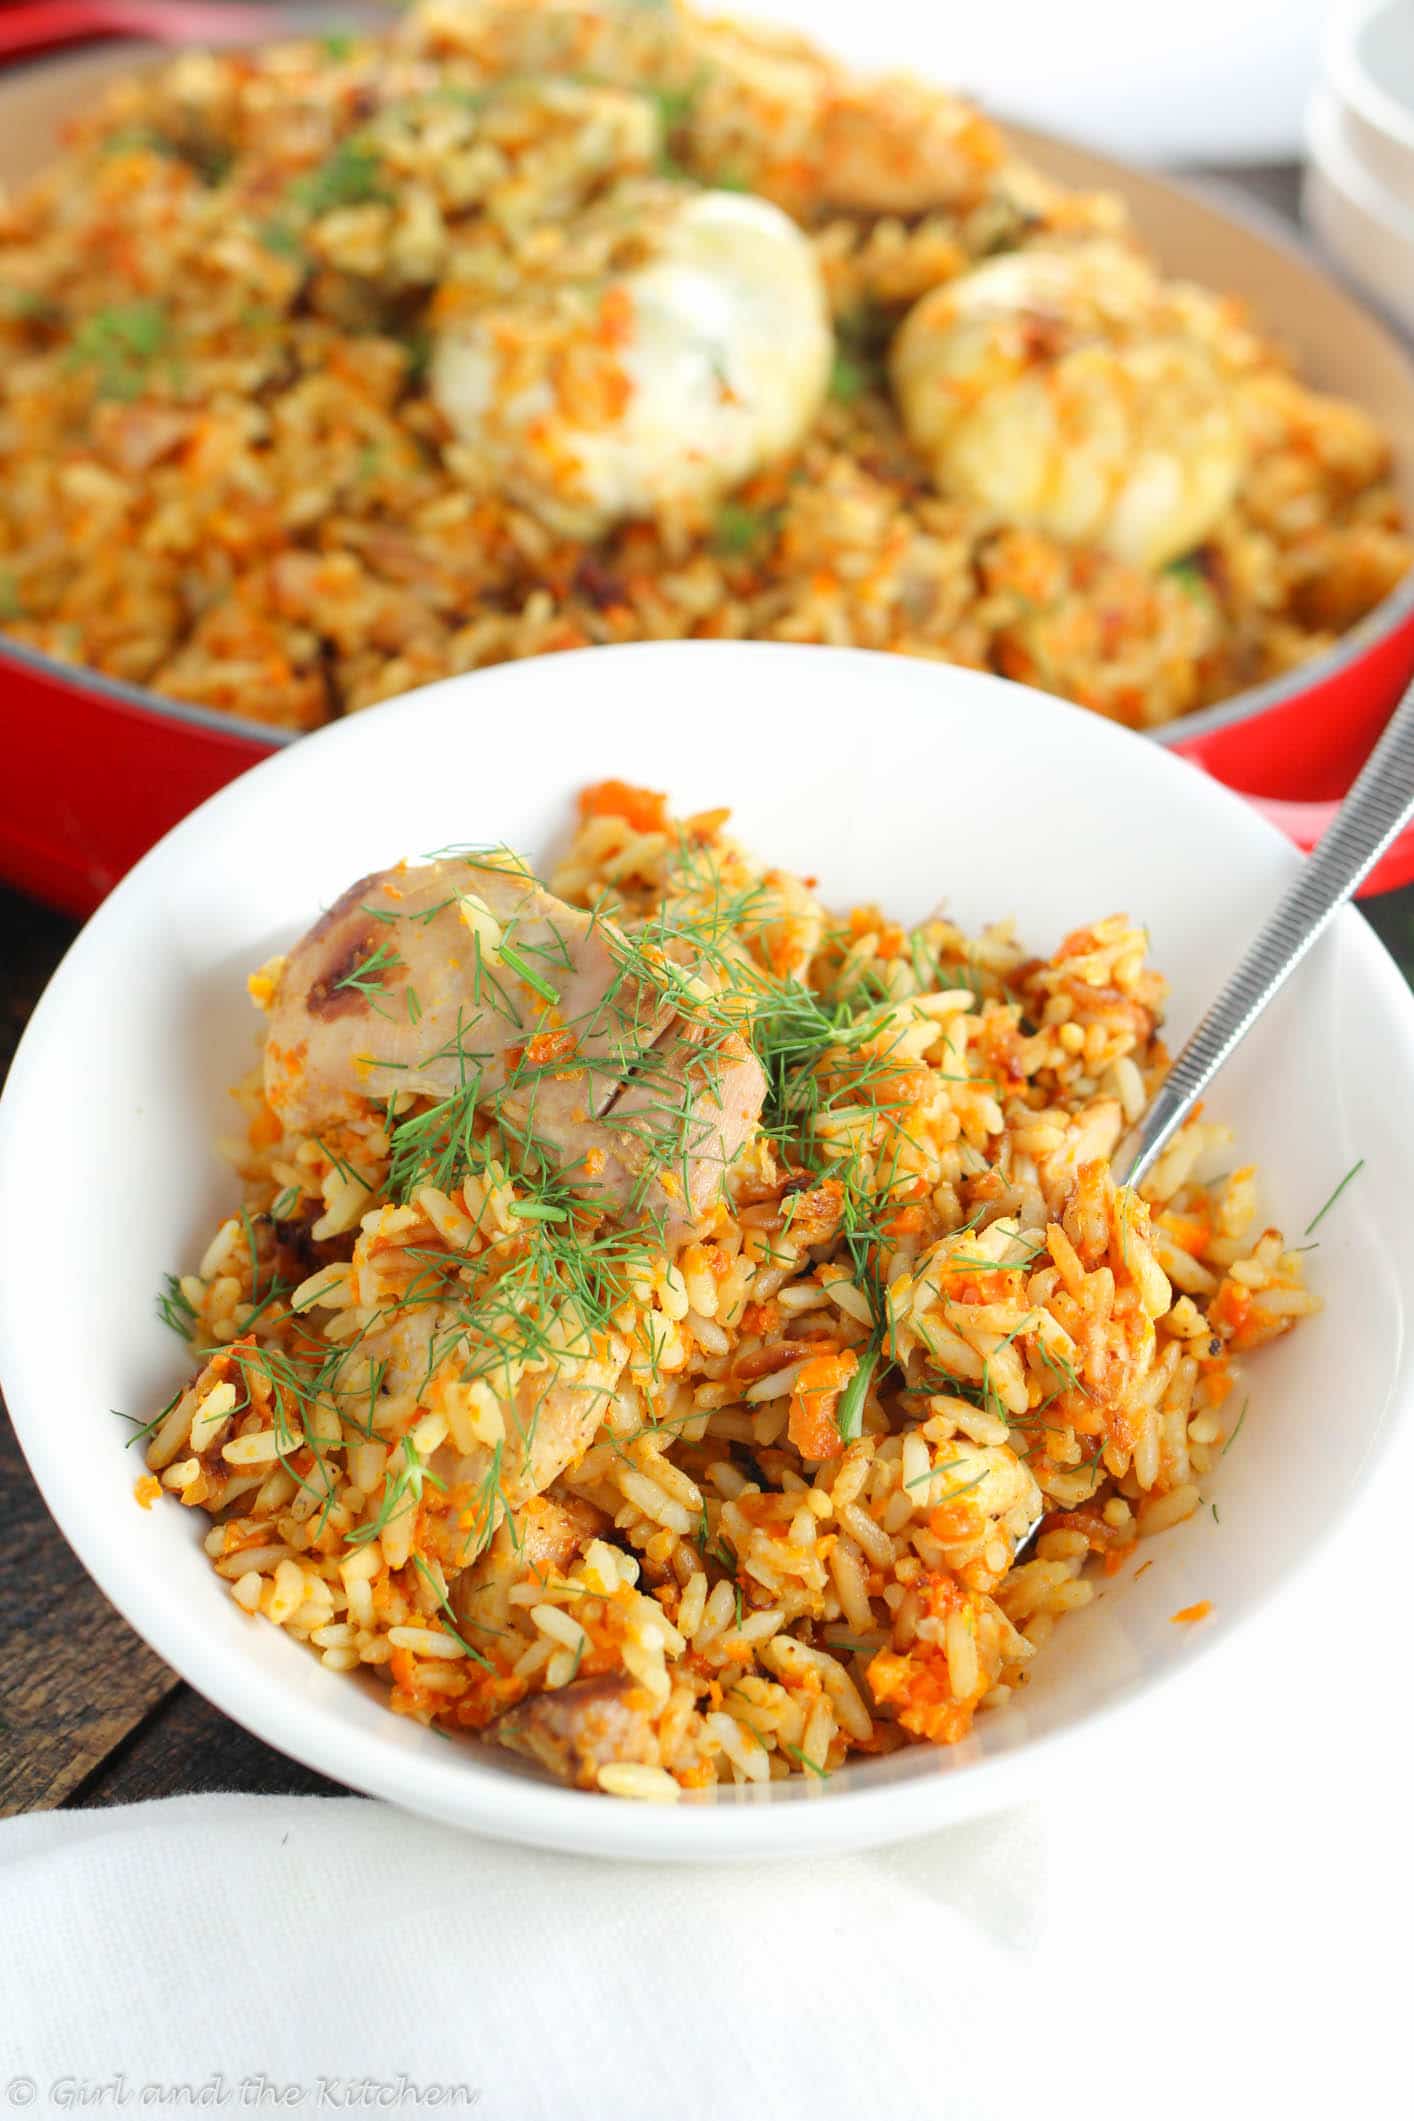 Plov is the ultimate Russian comfort food. It's a one pot chicken and rice recipe that is packed with flavors and spices and just takes a few steps to reach ultimate rice perfection. Perfect rice and tender chicken that beg you for just another bite. Plus it's SUPER freezer friendly! How awesome is that!